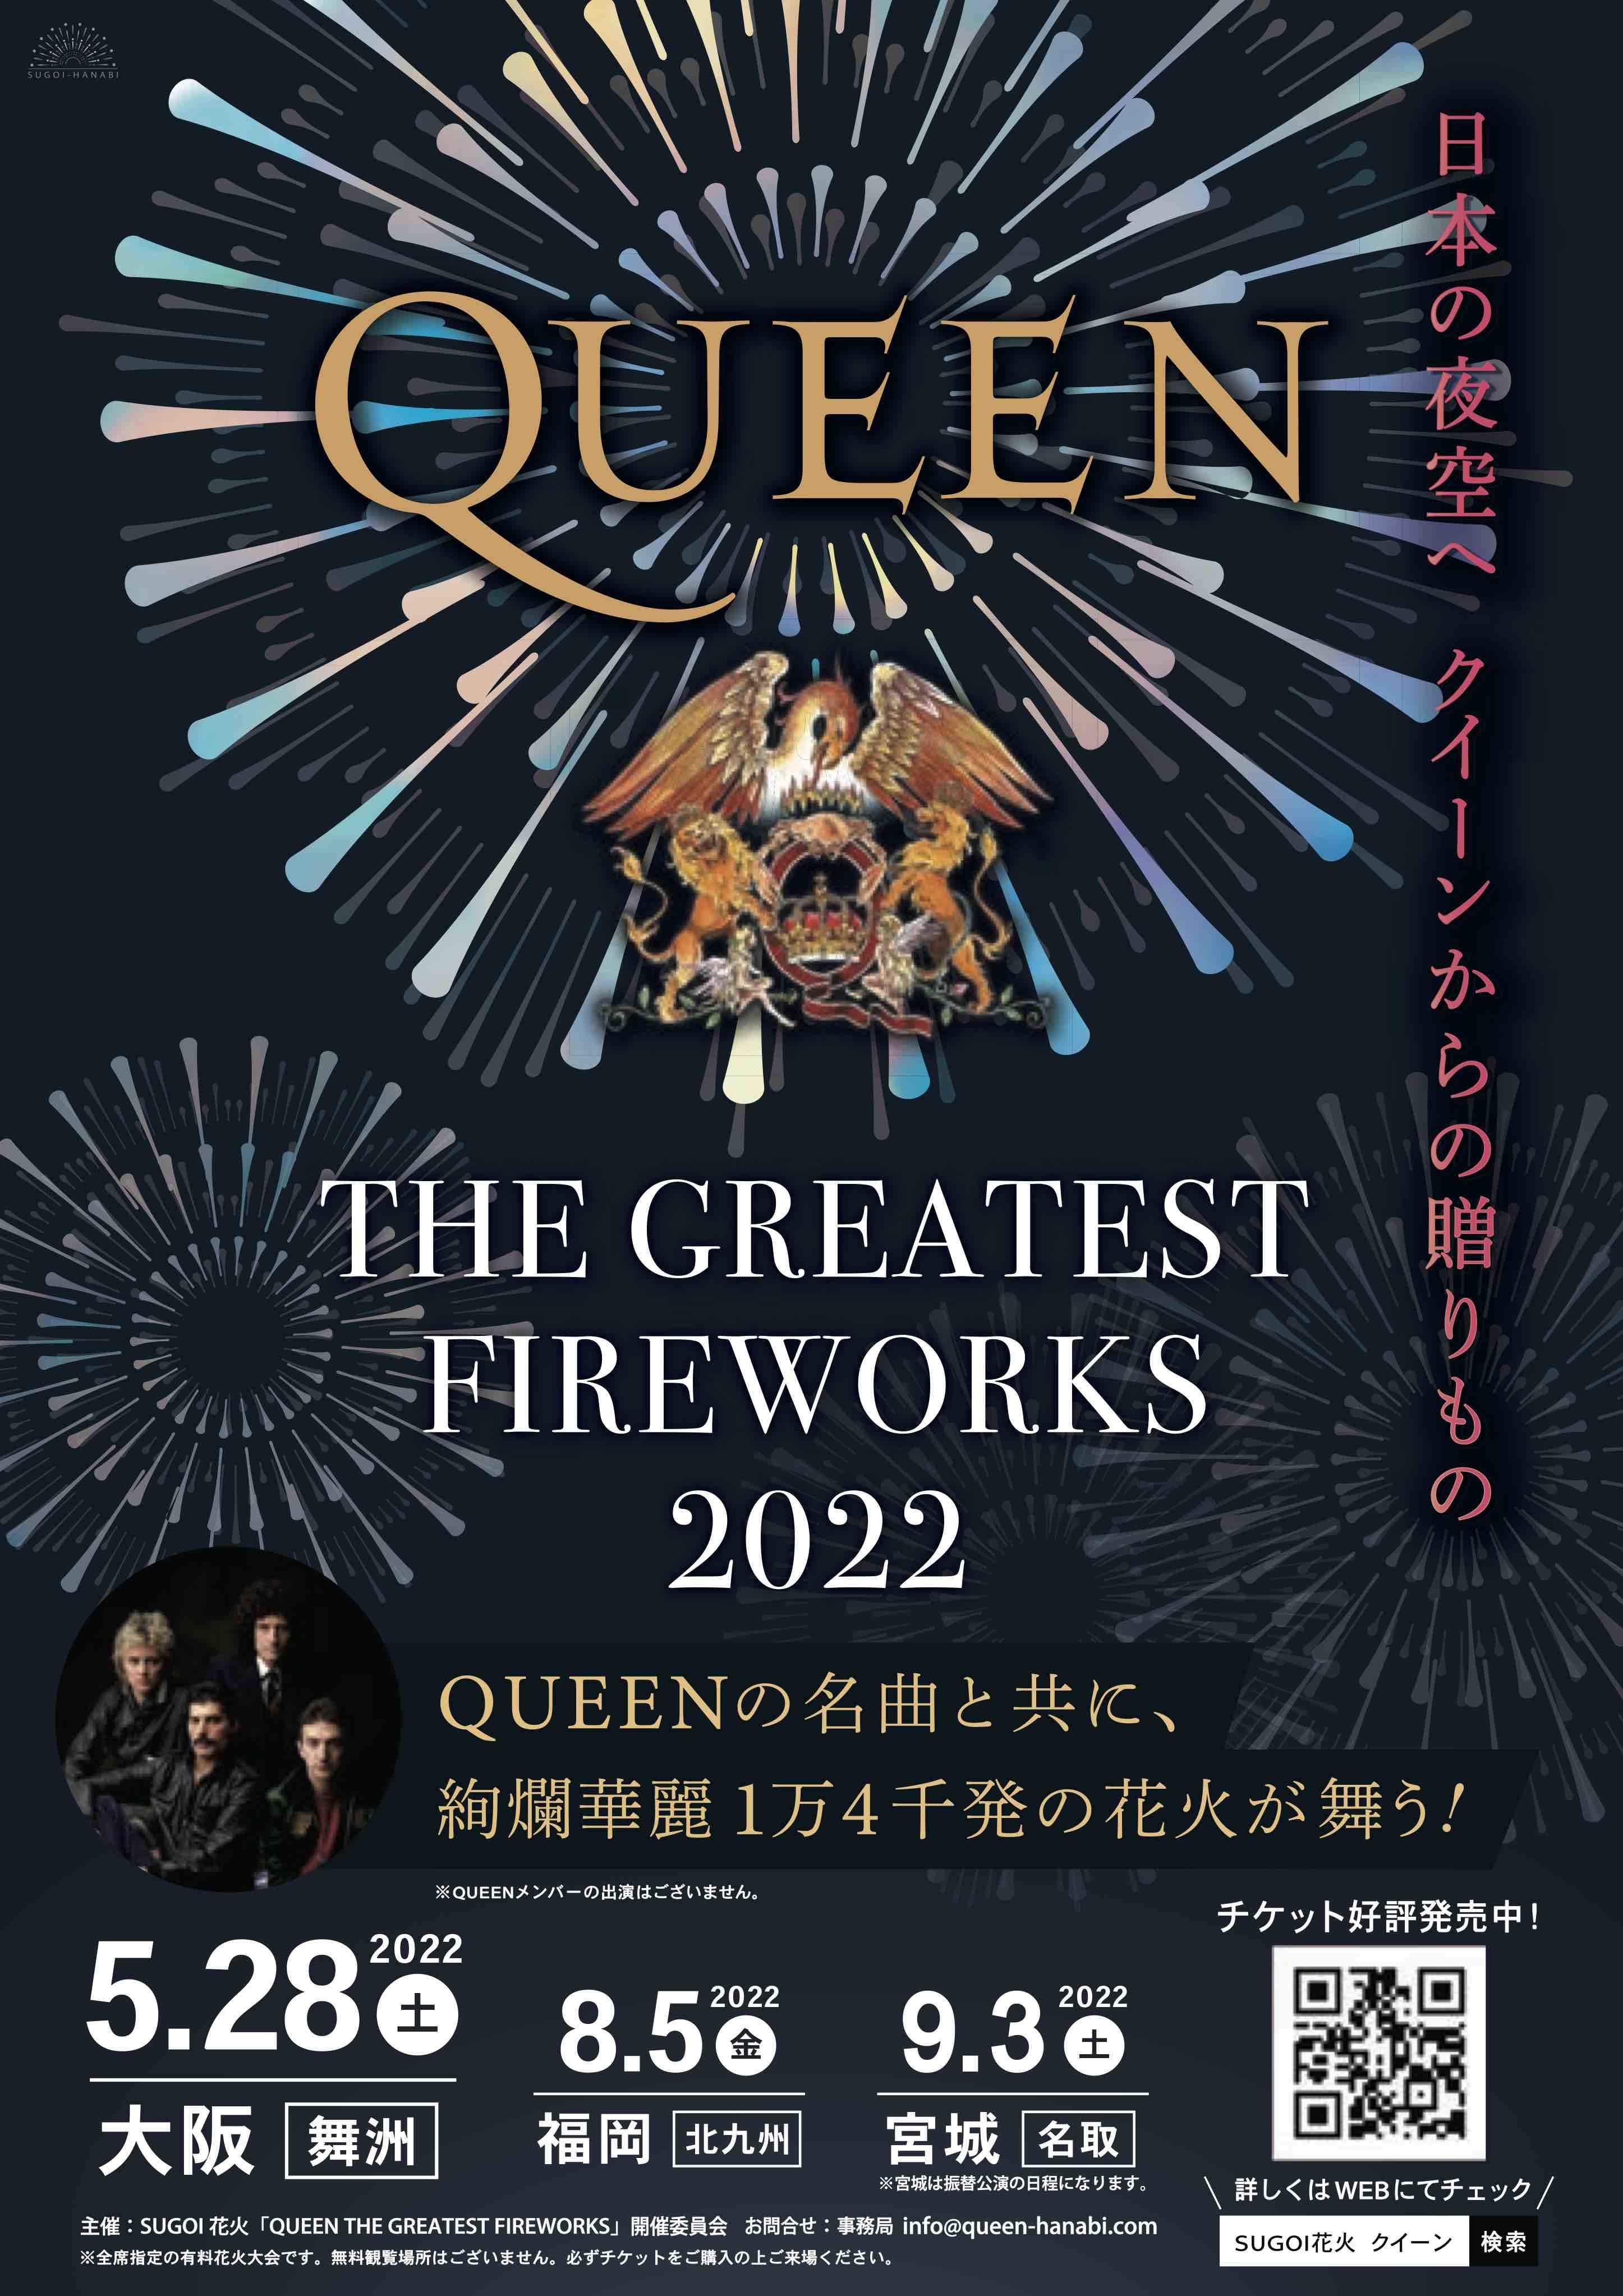 SUGOI花火『QUEEN THE GREATEST FIREWORKS 2022』